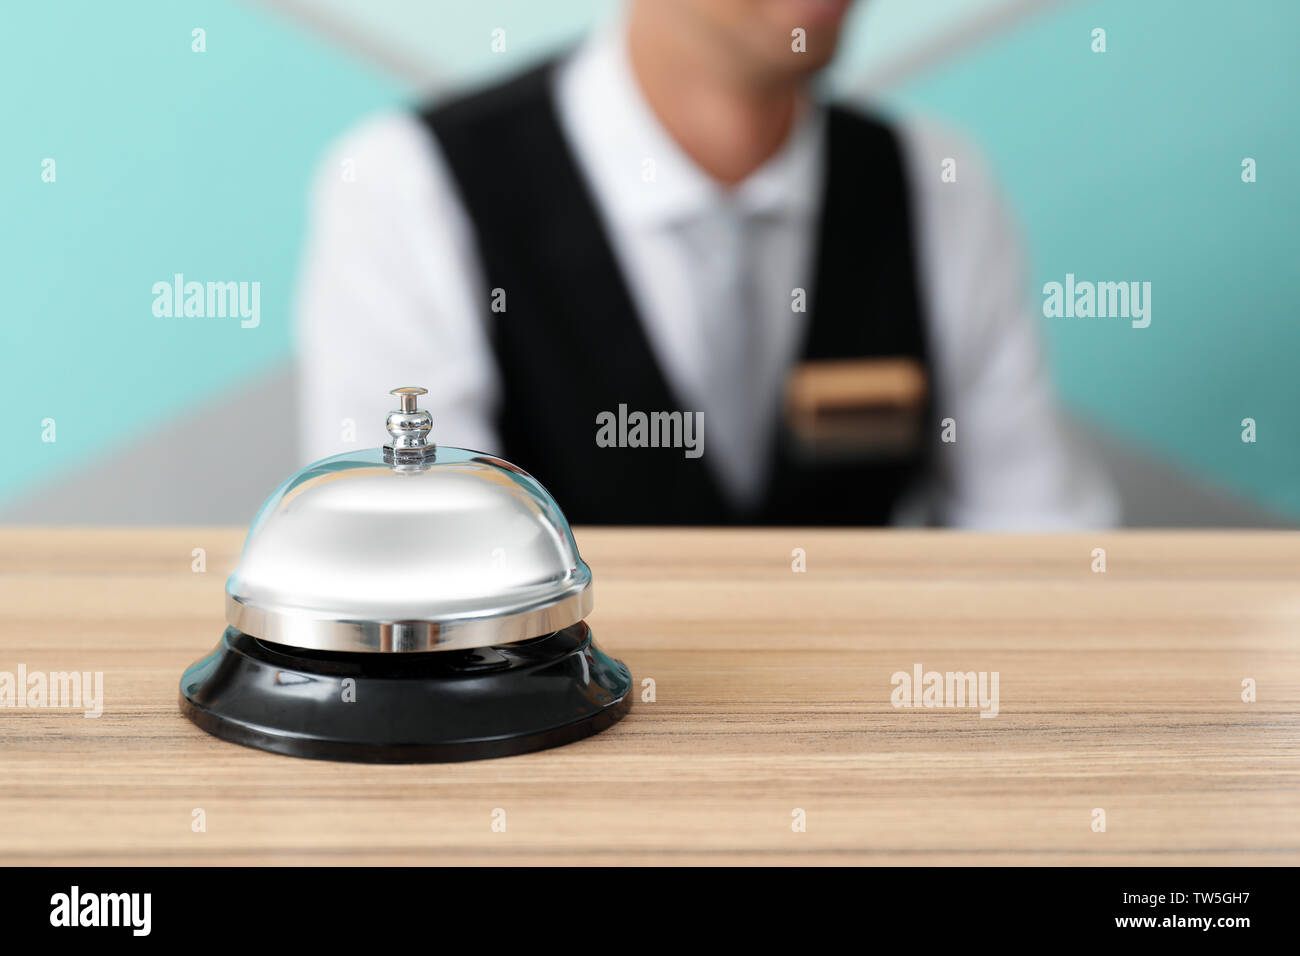 Silver Service Bell On Reception Desk In Hotel Stock Photo